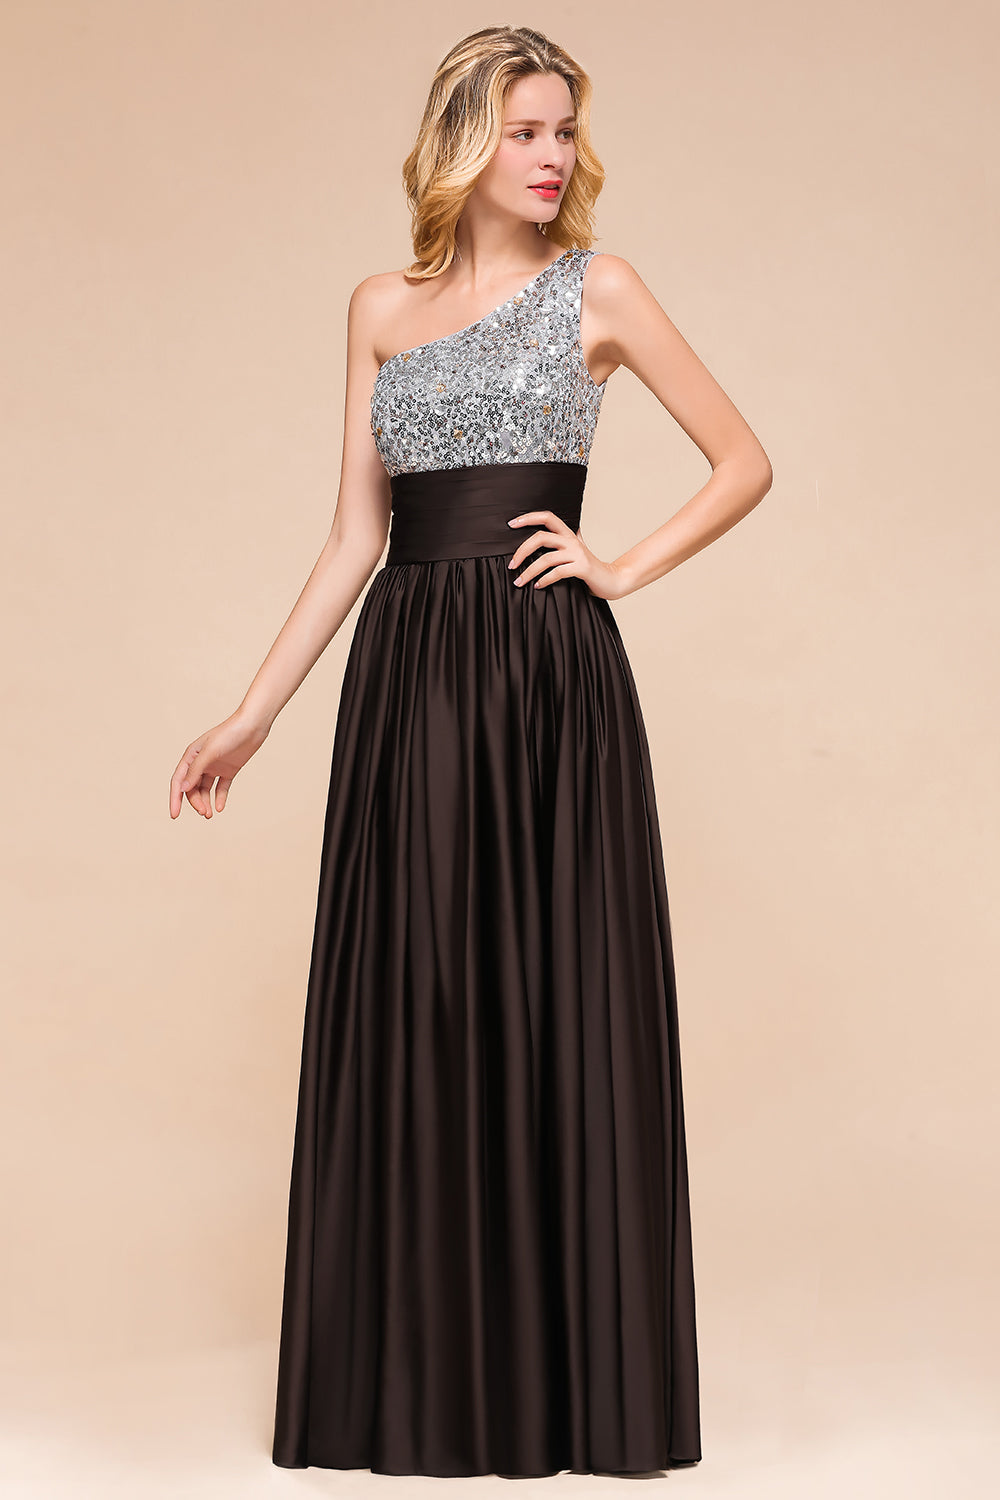 Affordable One Shoulder Sequins Long Bridesmaid Dresses with Ruffle